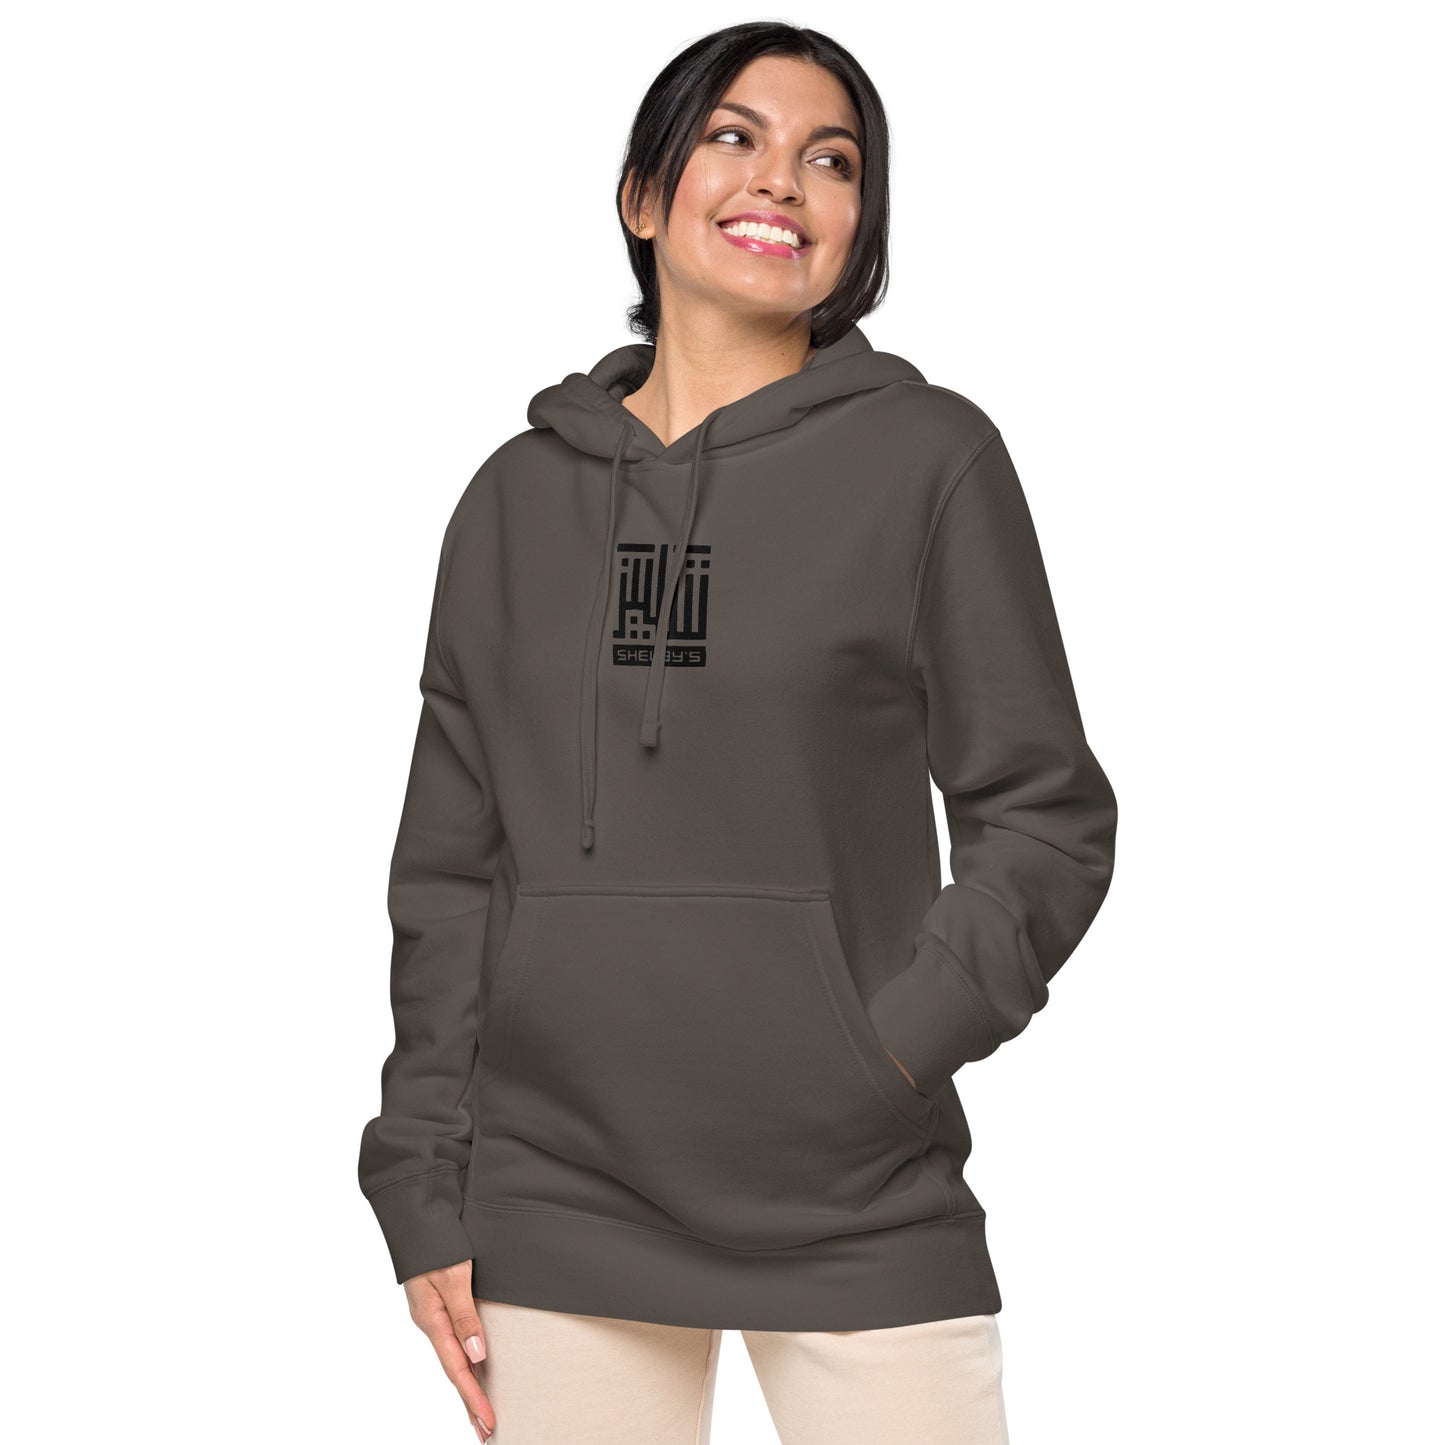 Shelby's Arabic Square - Embroidered Hoodie